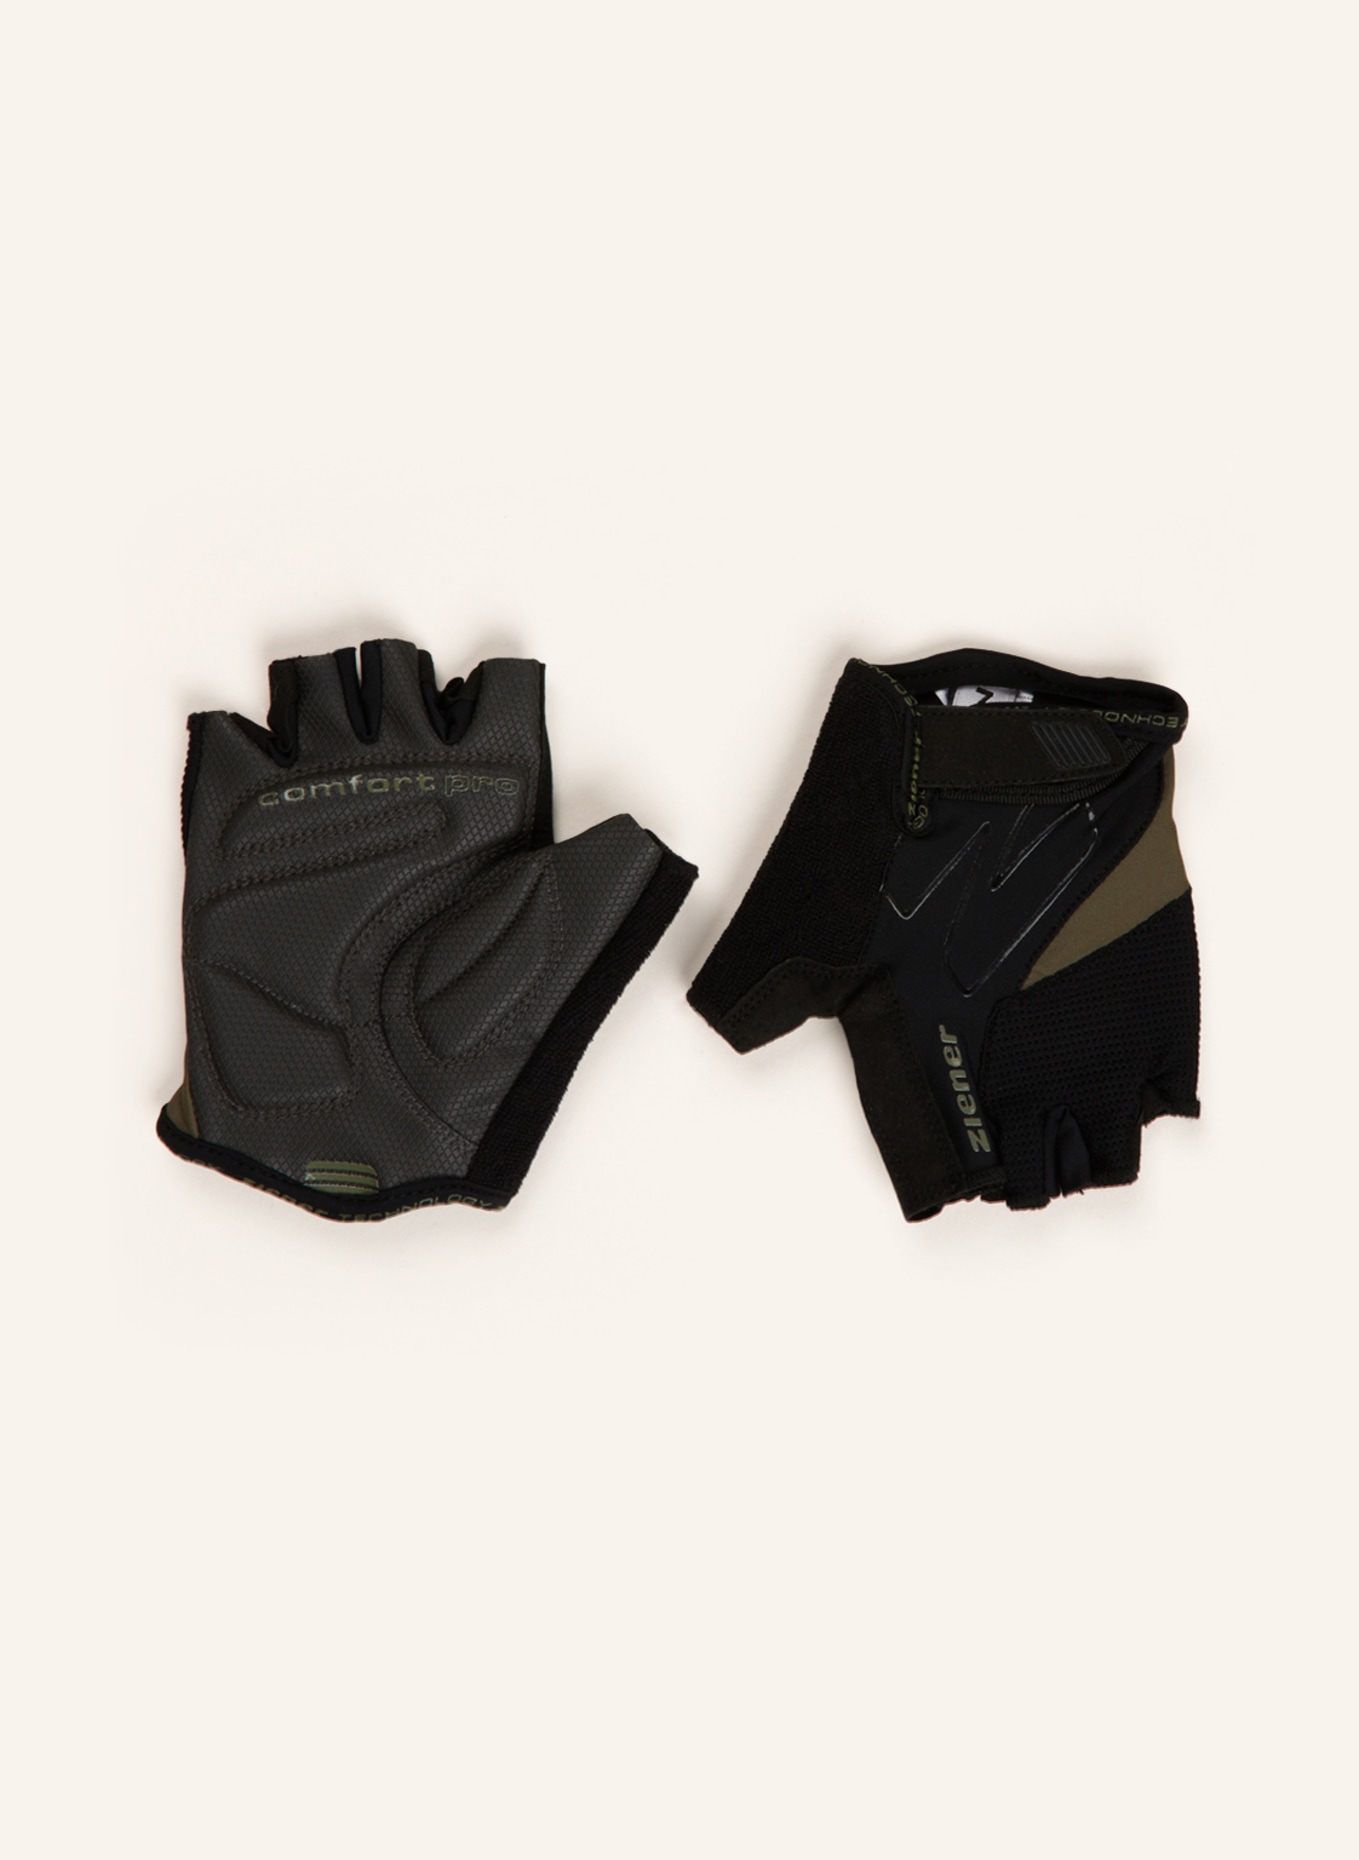 Cycling khaki gloves in black/ ziener CRAVE